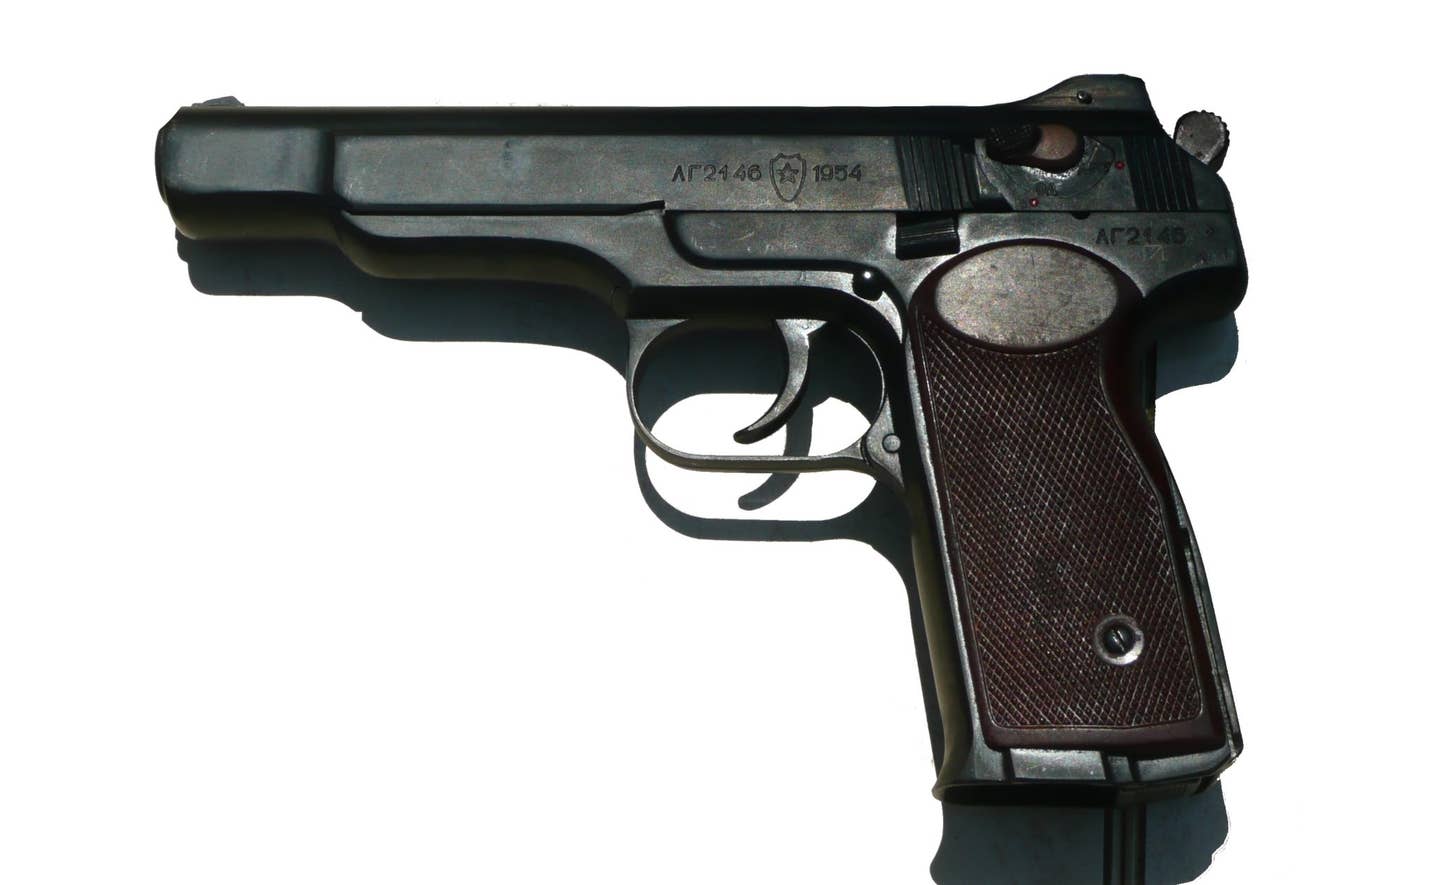 A Stechkin machine pistol, similar to the one carried by Major Kilipov. (Wikimedia Commons photo by Andrew Butko)